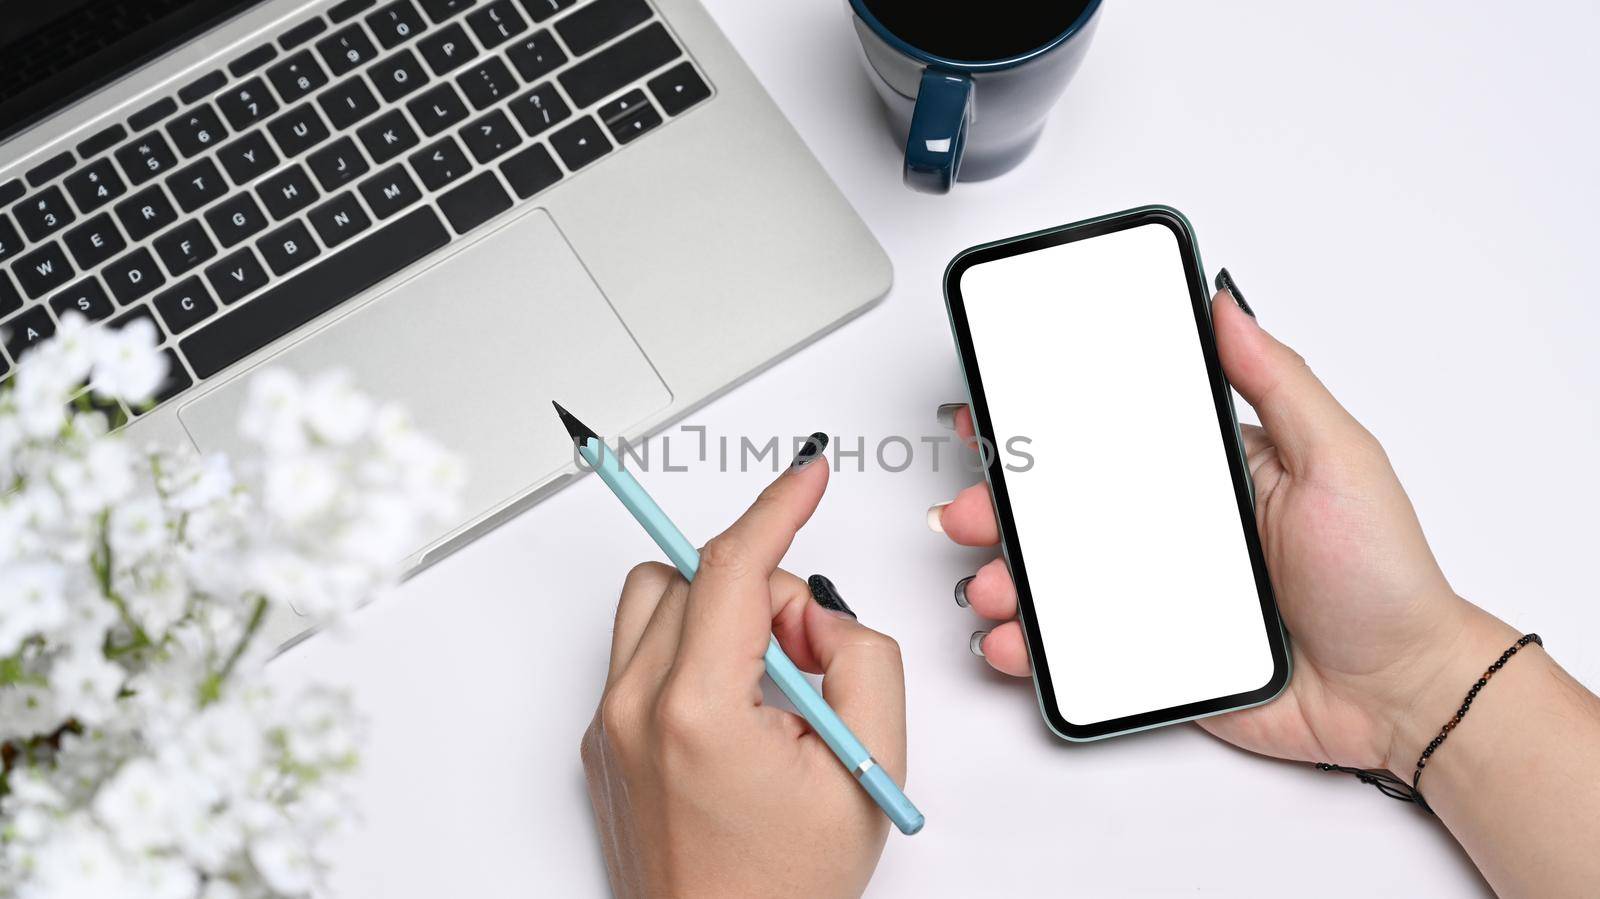 Mockup image of young woman sitting in front of laptop computer and using mobile phone. by prathanchorruangsak